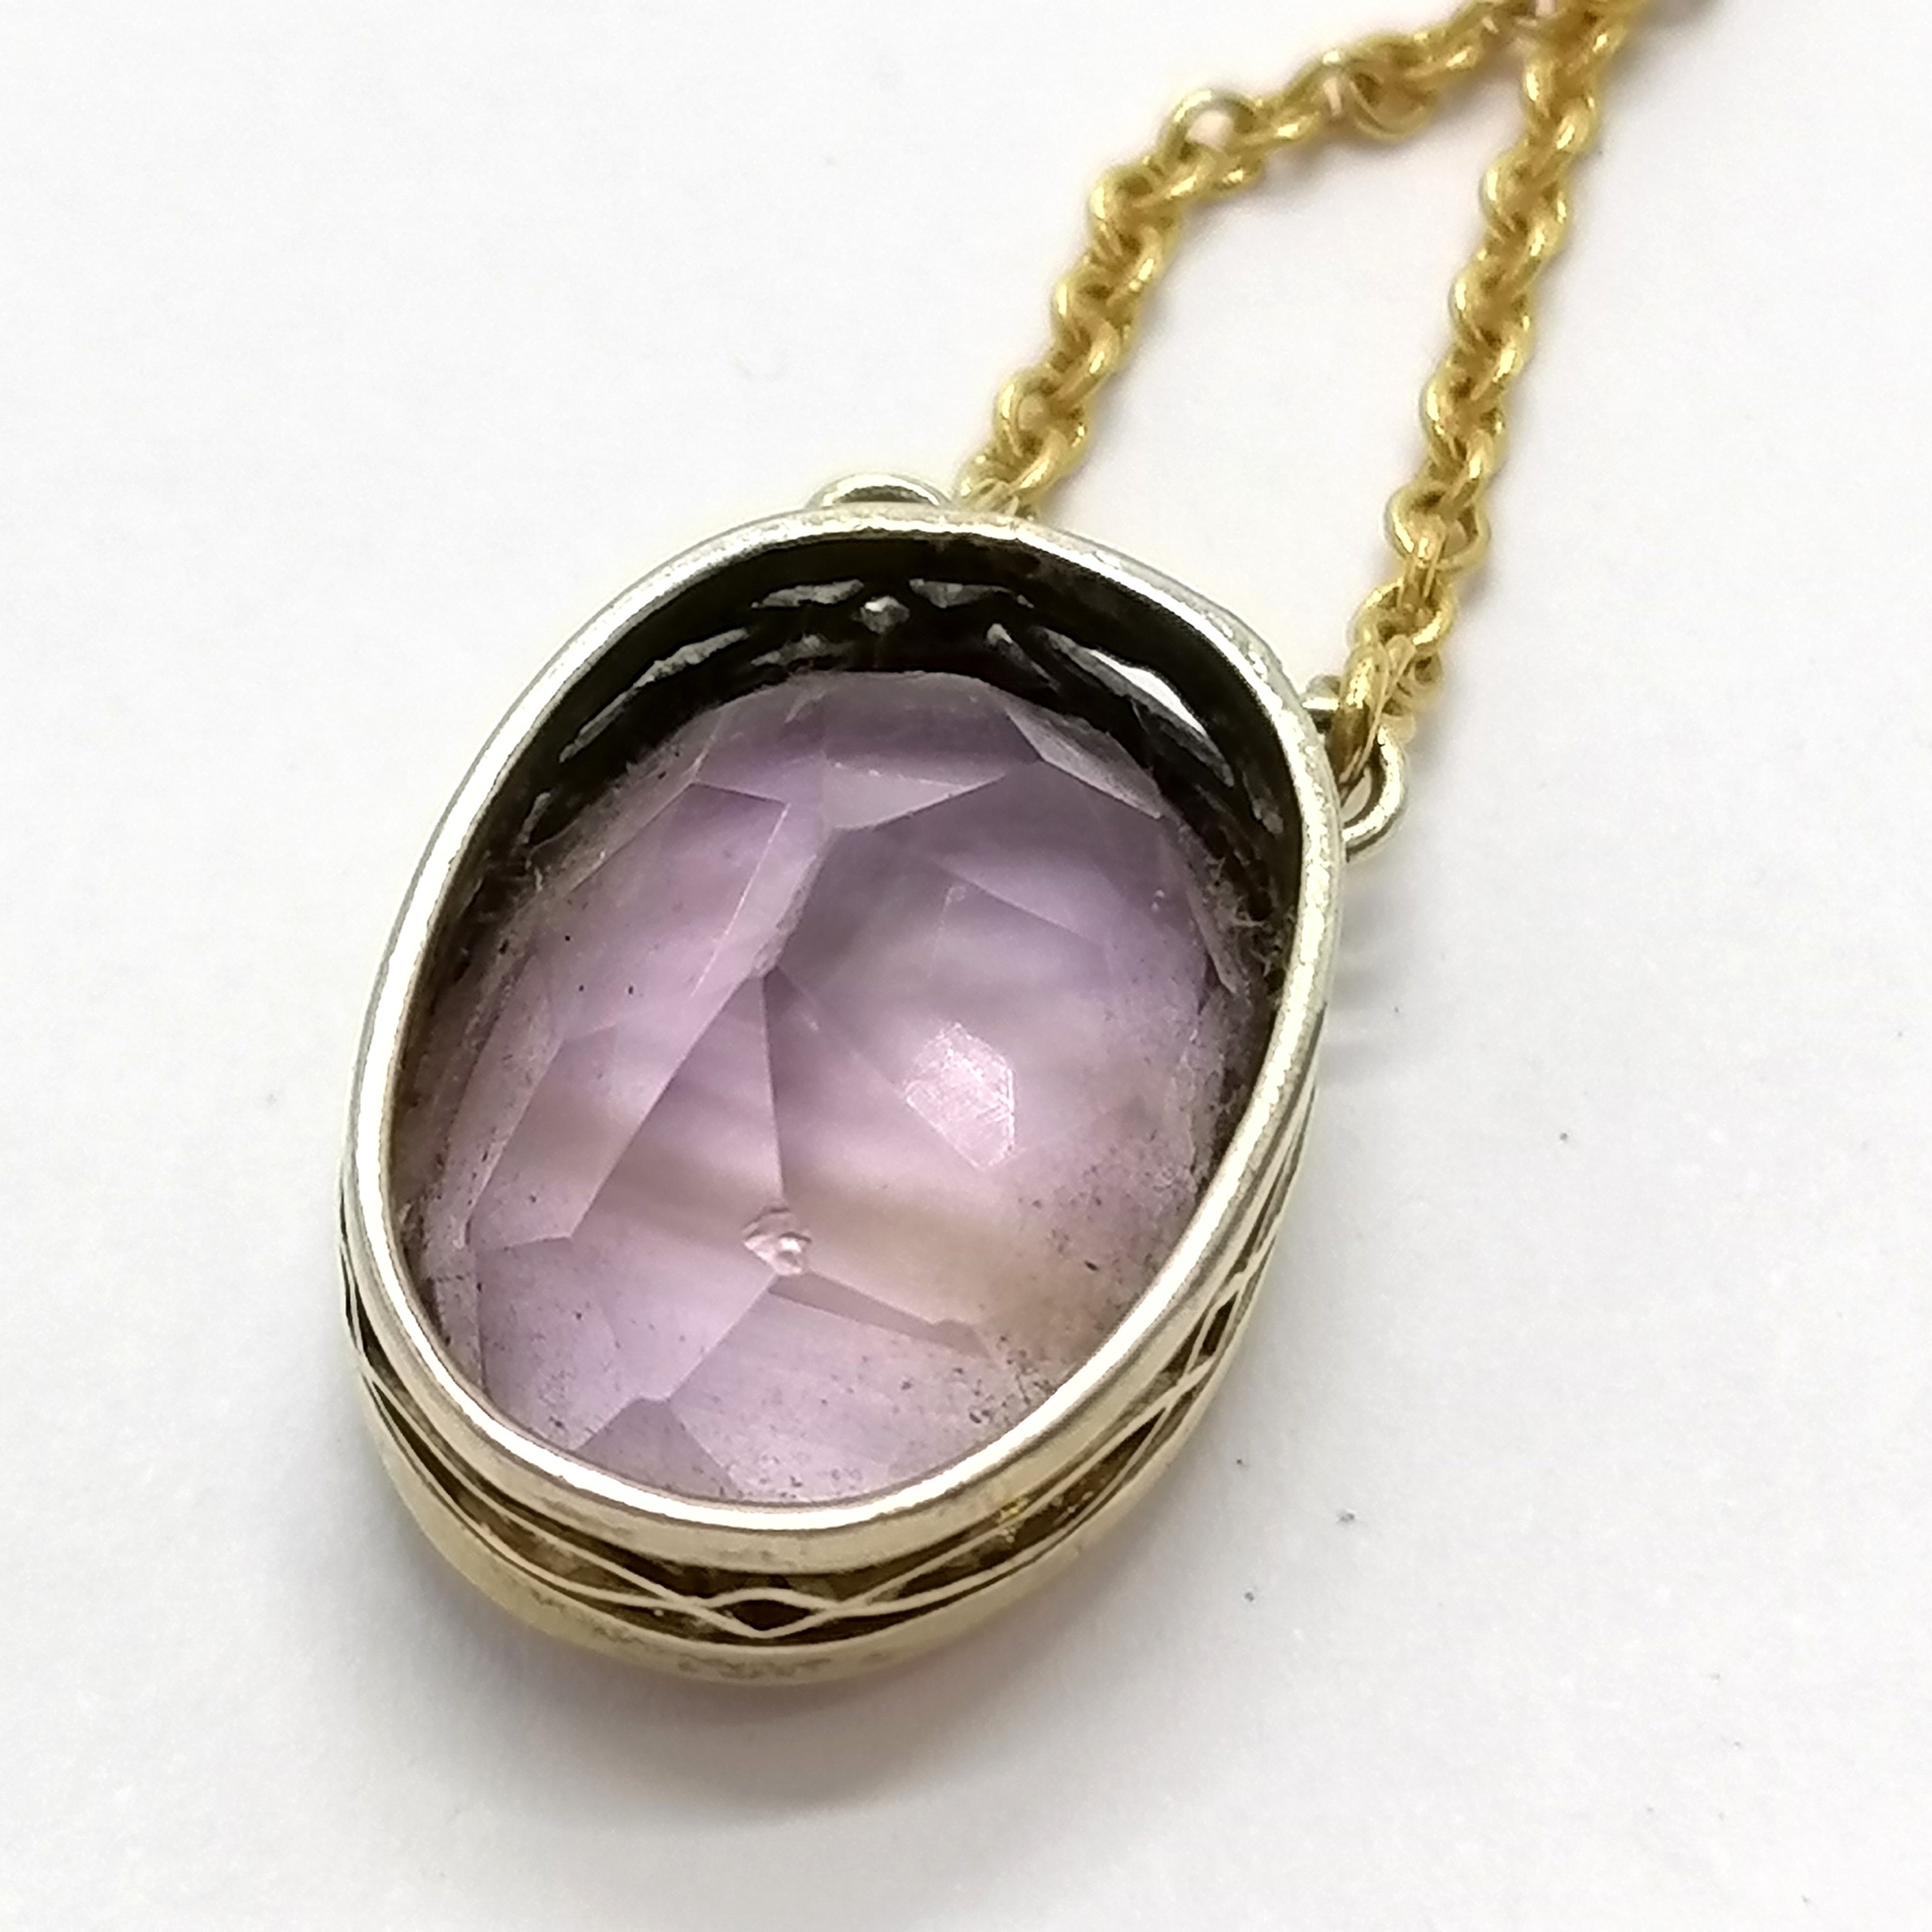 Amethyst pendant on a gold 50cm chain with a 9ct gold clasp - total weight 6g - Image 2 of 4